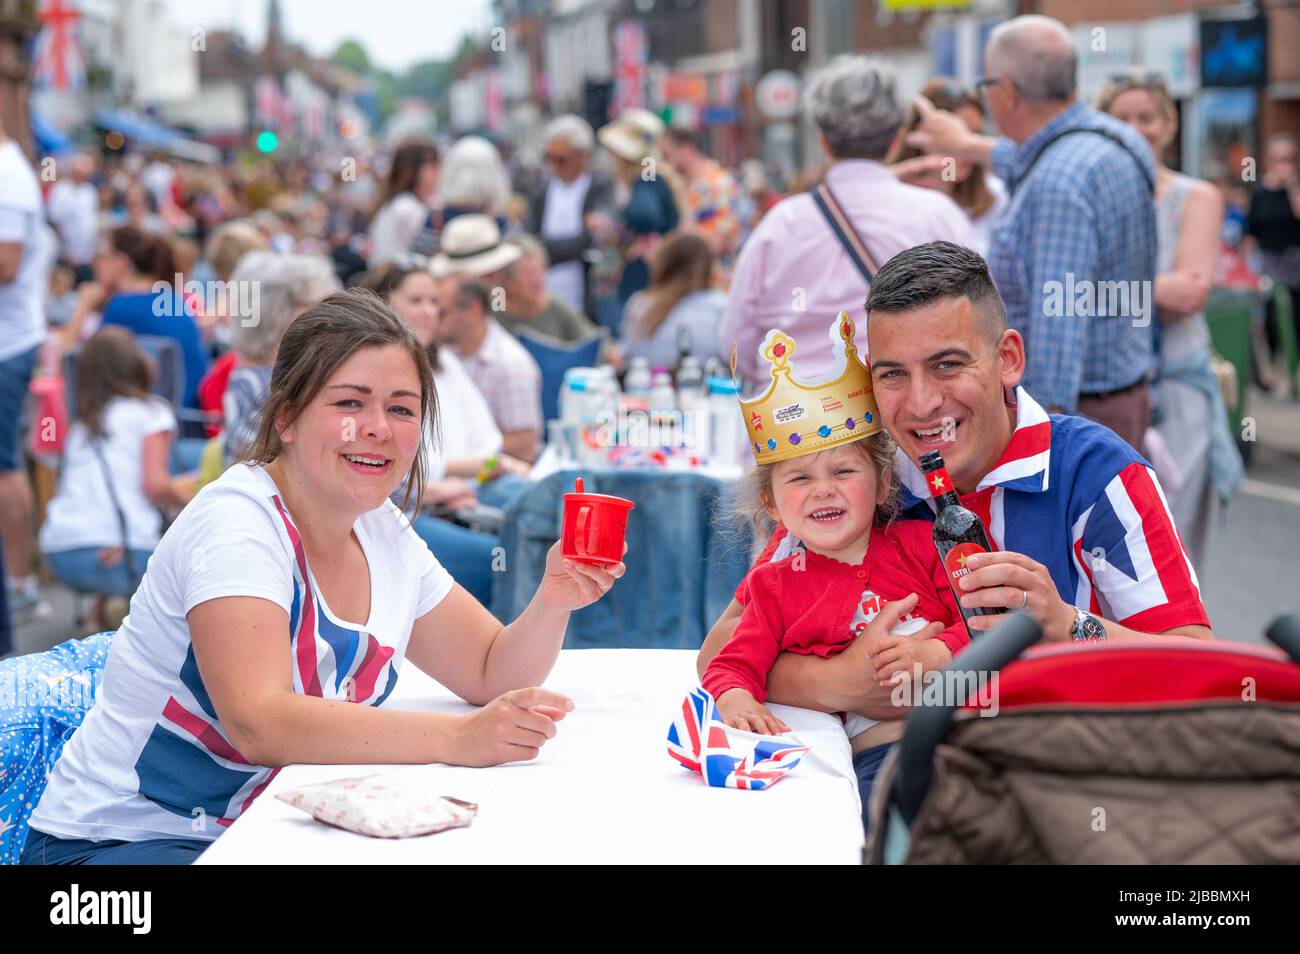 Platinum Jubilee celebrations in Kenilworth, Warwickshire. Thousands of locals enjoyed the main road closure, to sit on picnic tables and celebrate the Queen's 70th anniversary of her reign. Stock Photo